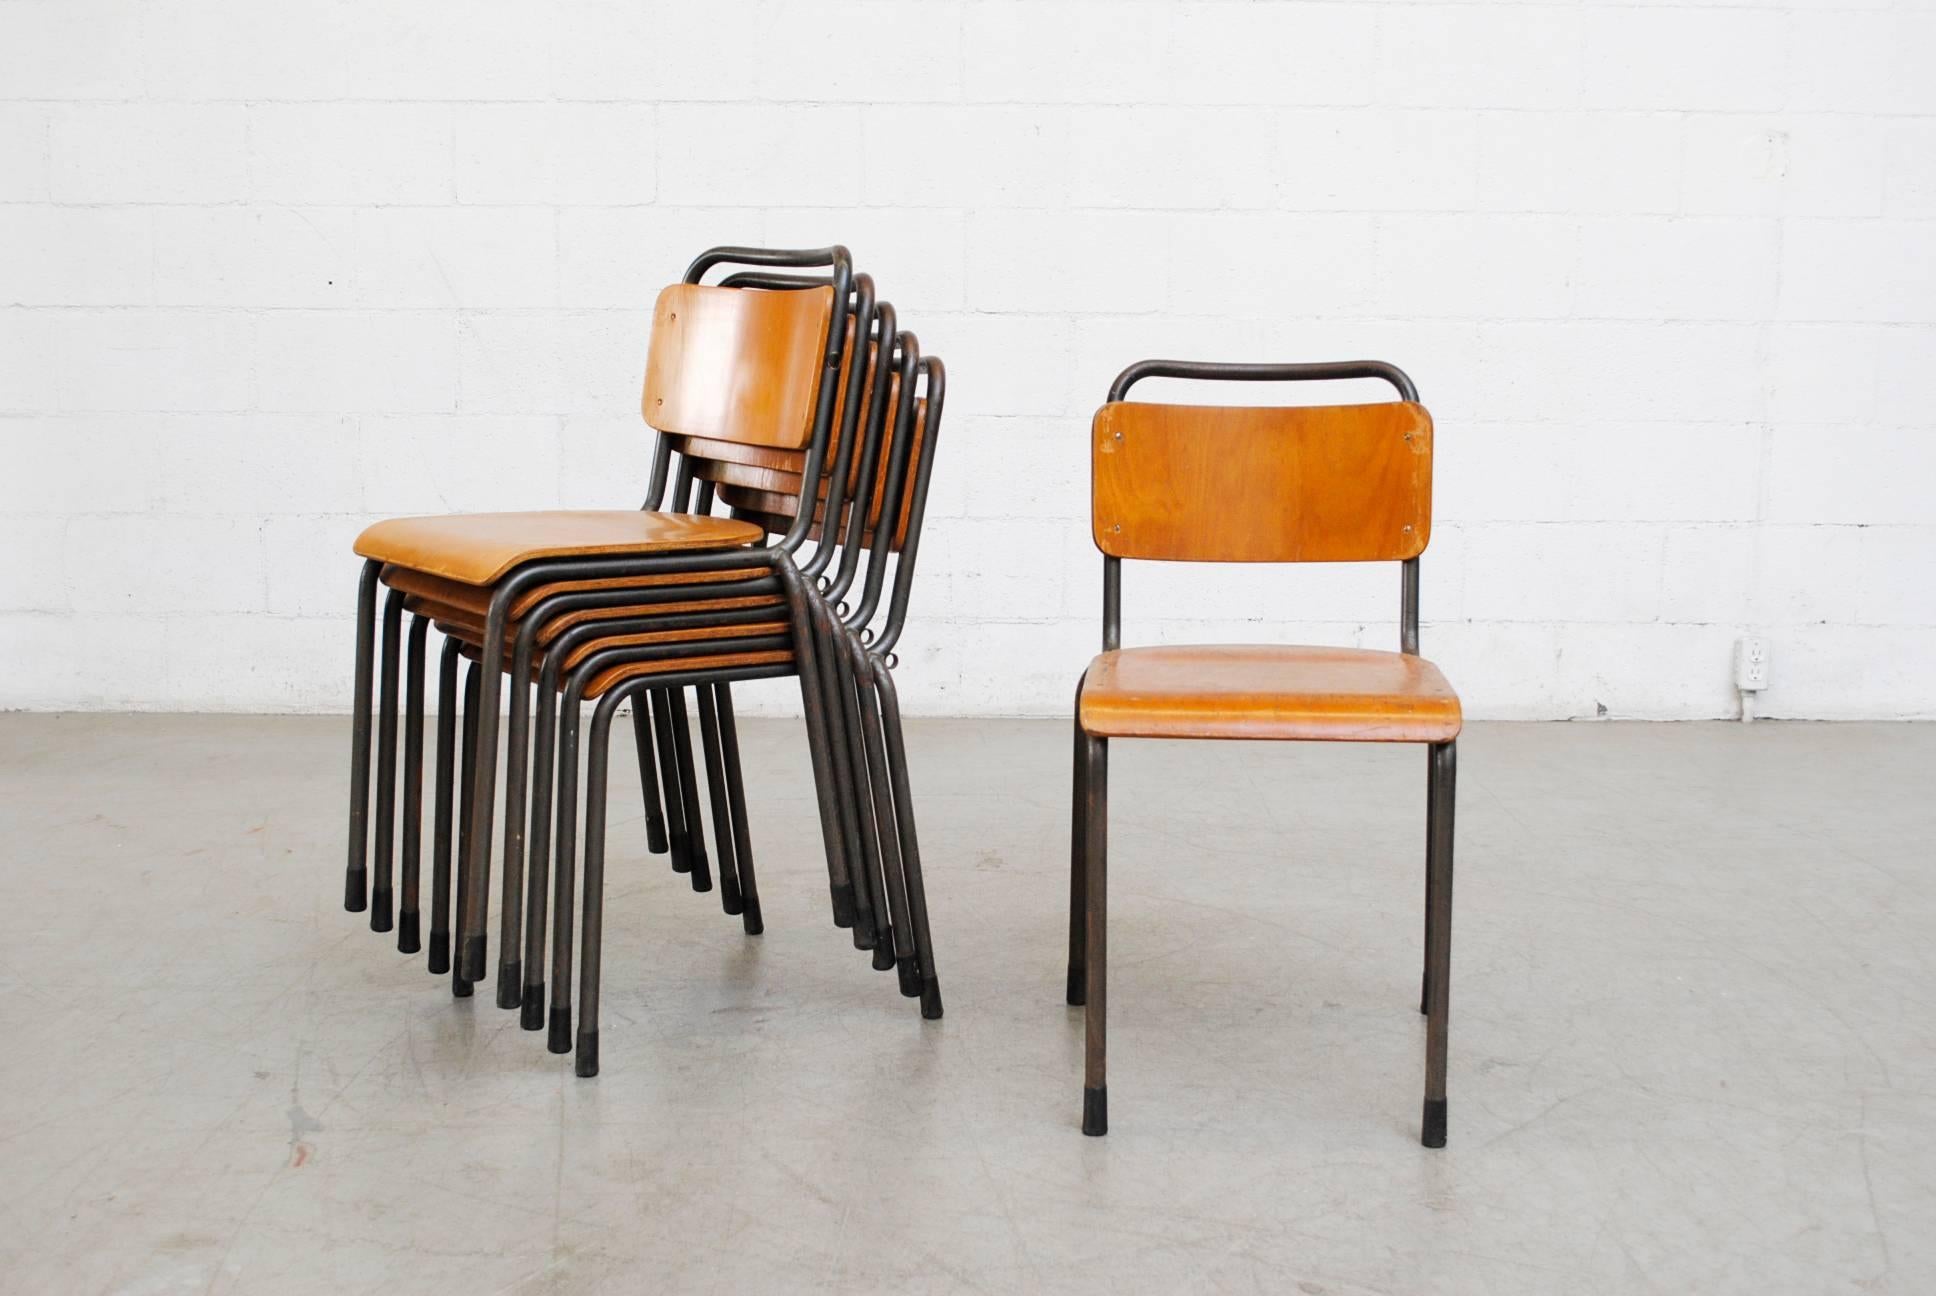 Stackable Industrial school chairs with grey enameled metal frames and molded plywood seats and backs. In very original condition with visible signs of wear, well loved. Nice patina.